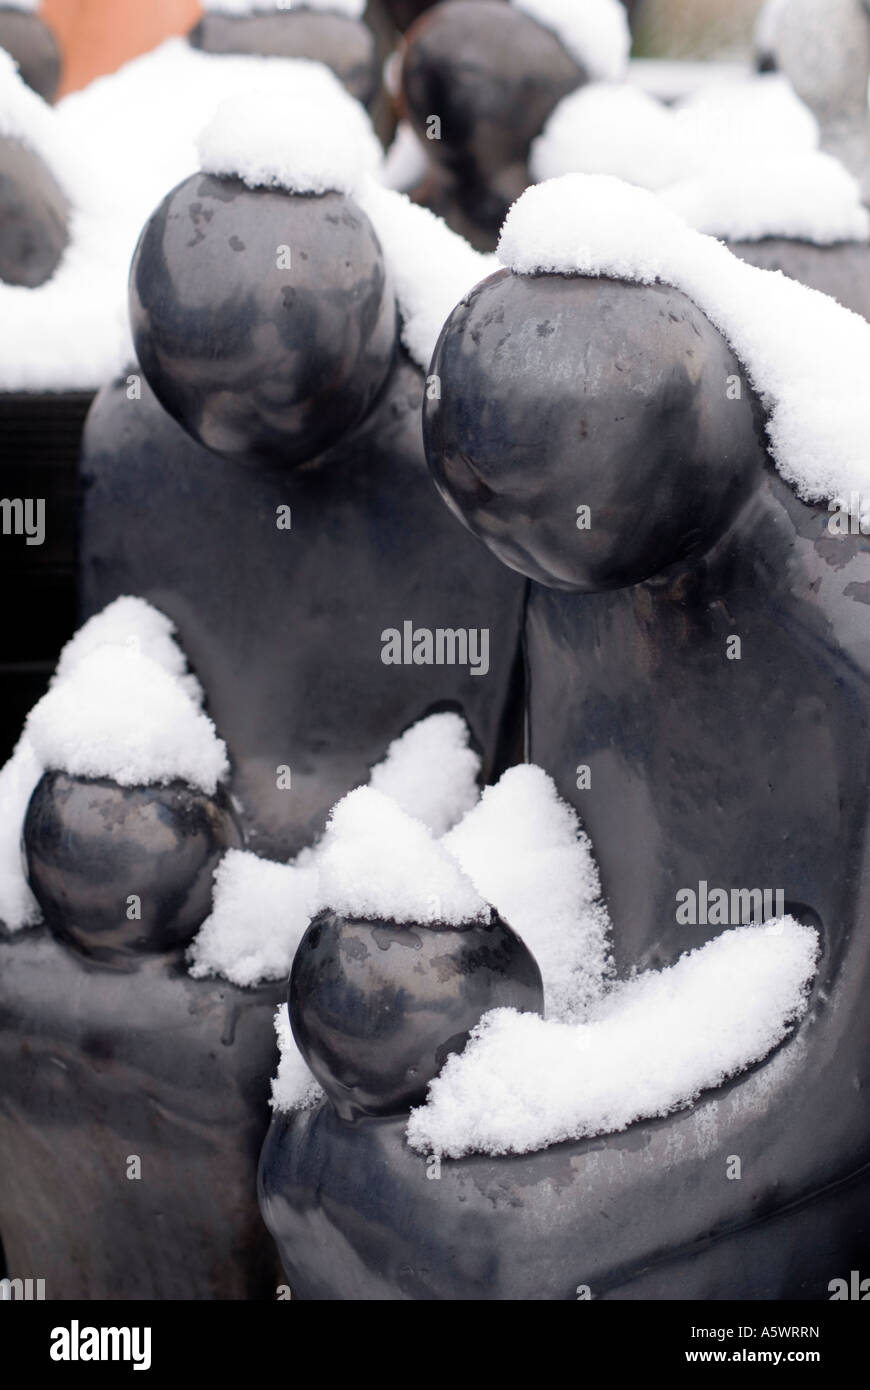 Garden ornaments covered by snow black earthenware figures Stock Photo